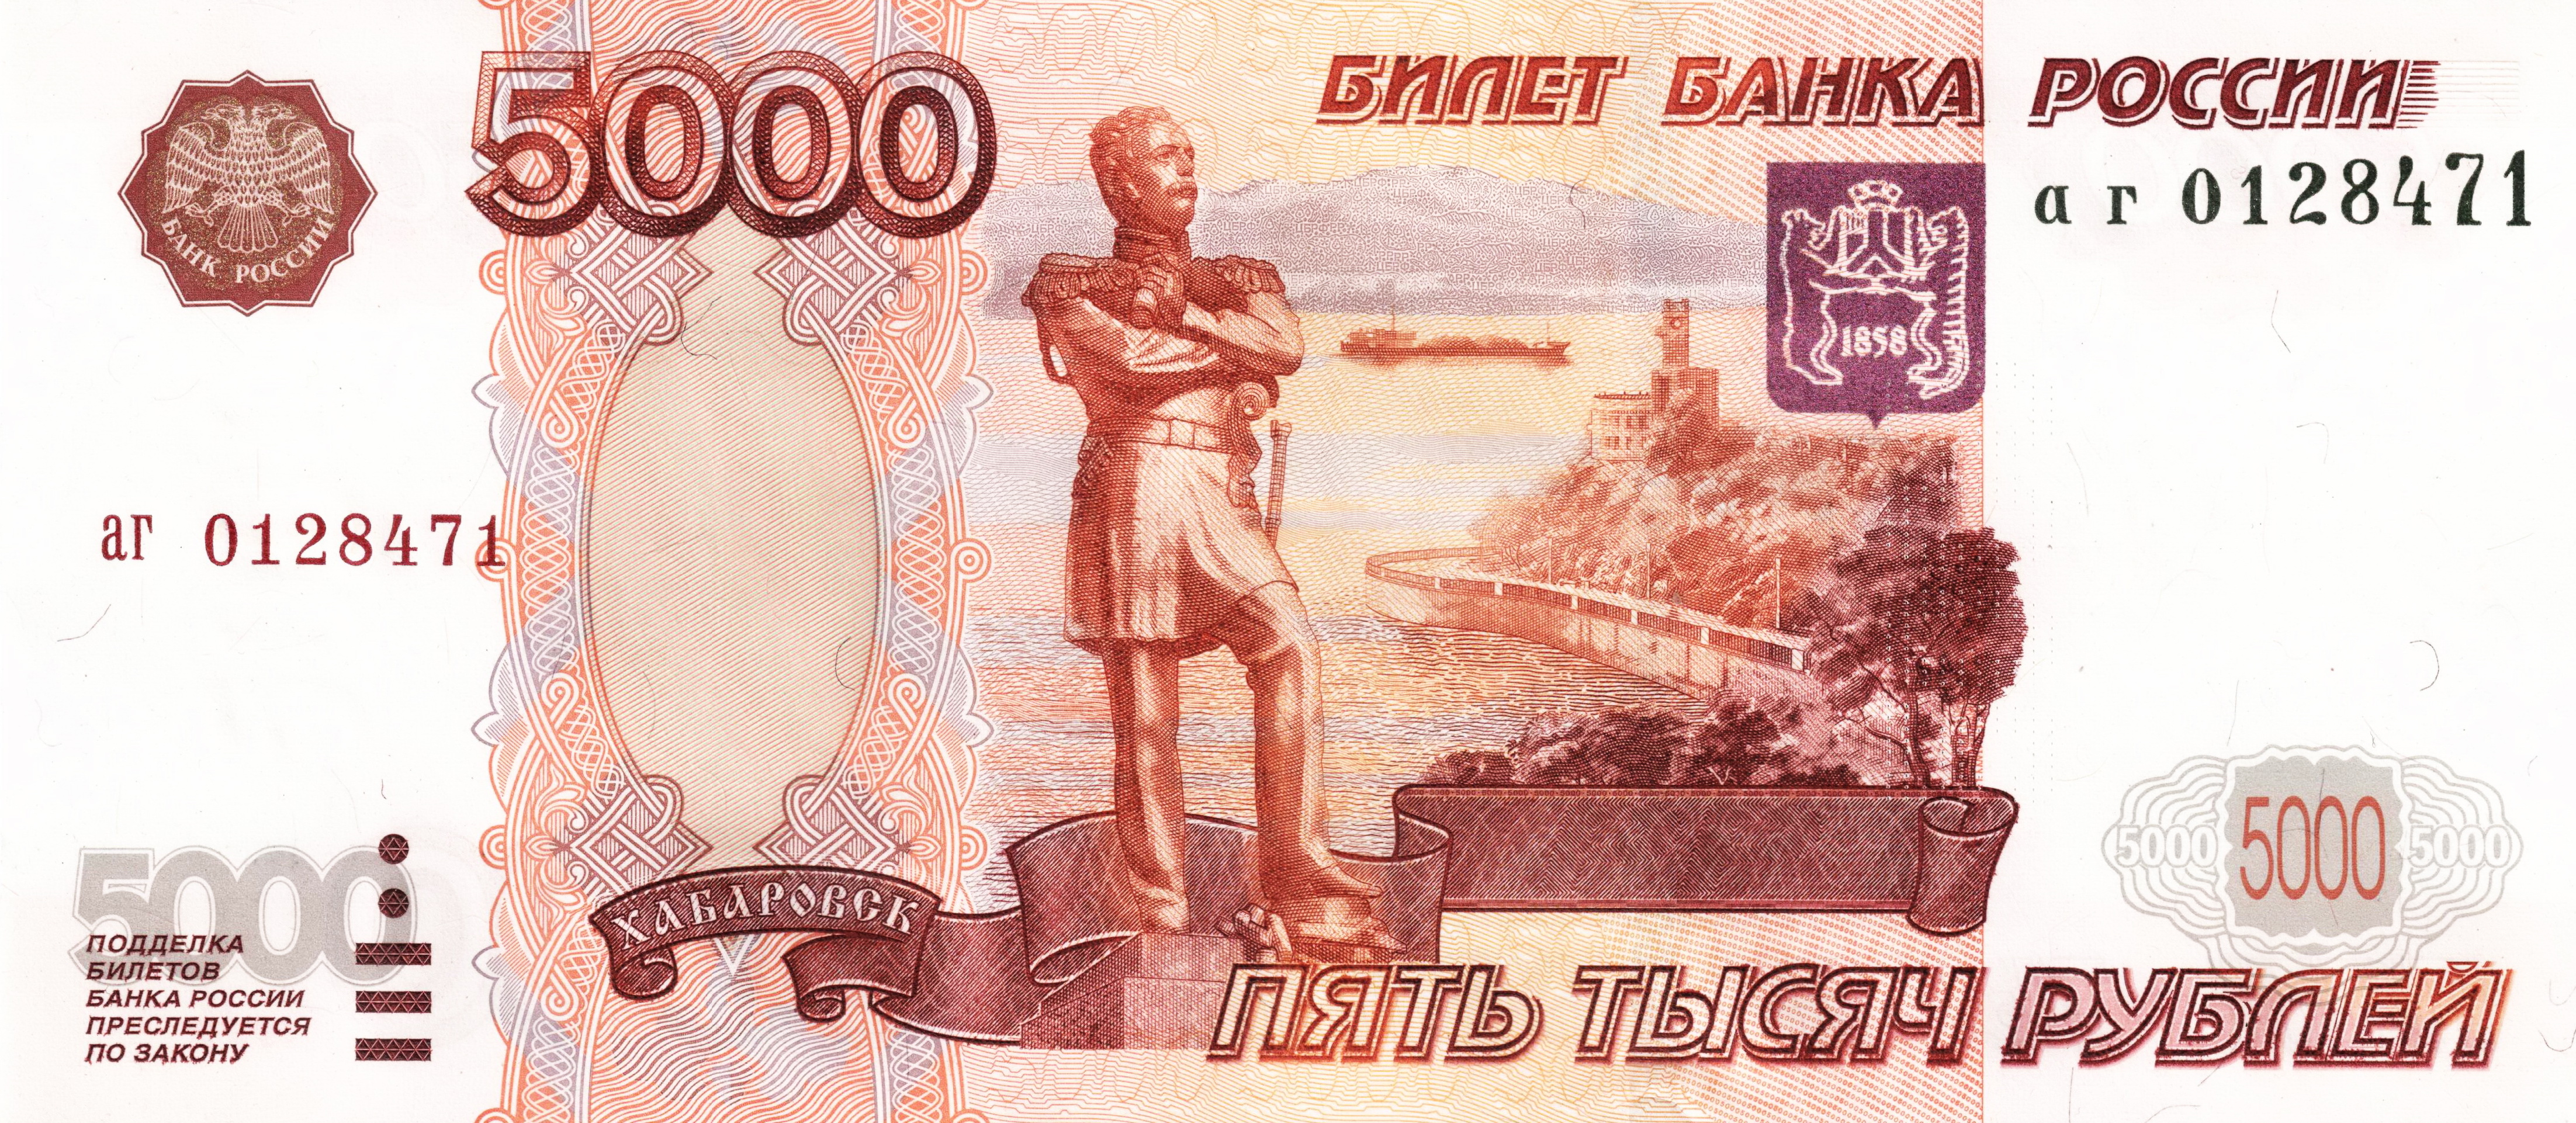 File:Banknote 5000 rubles (1997) front.jpg - Wikimedia Commons